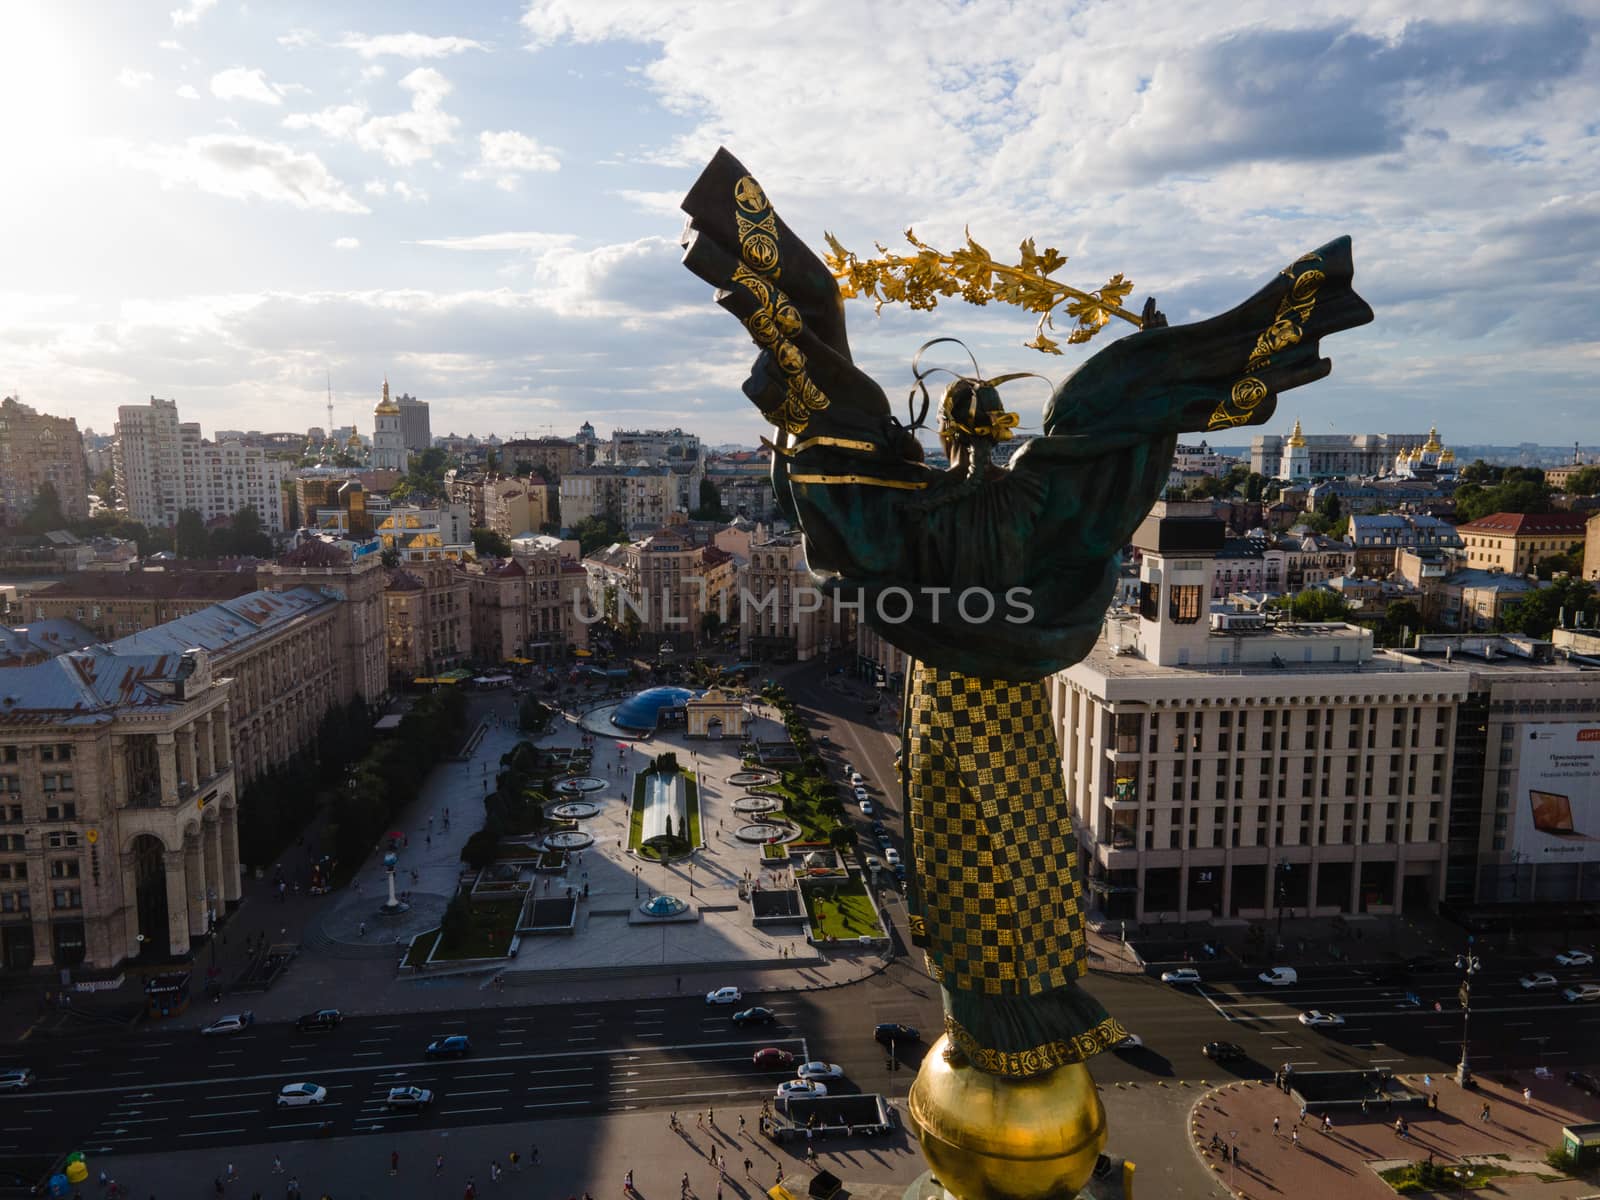 The architecture of Kyiv. Ukraine: Independence Square, Maidan Aerial view